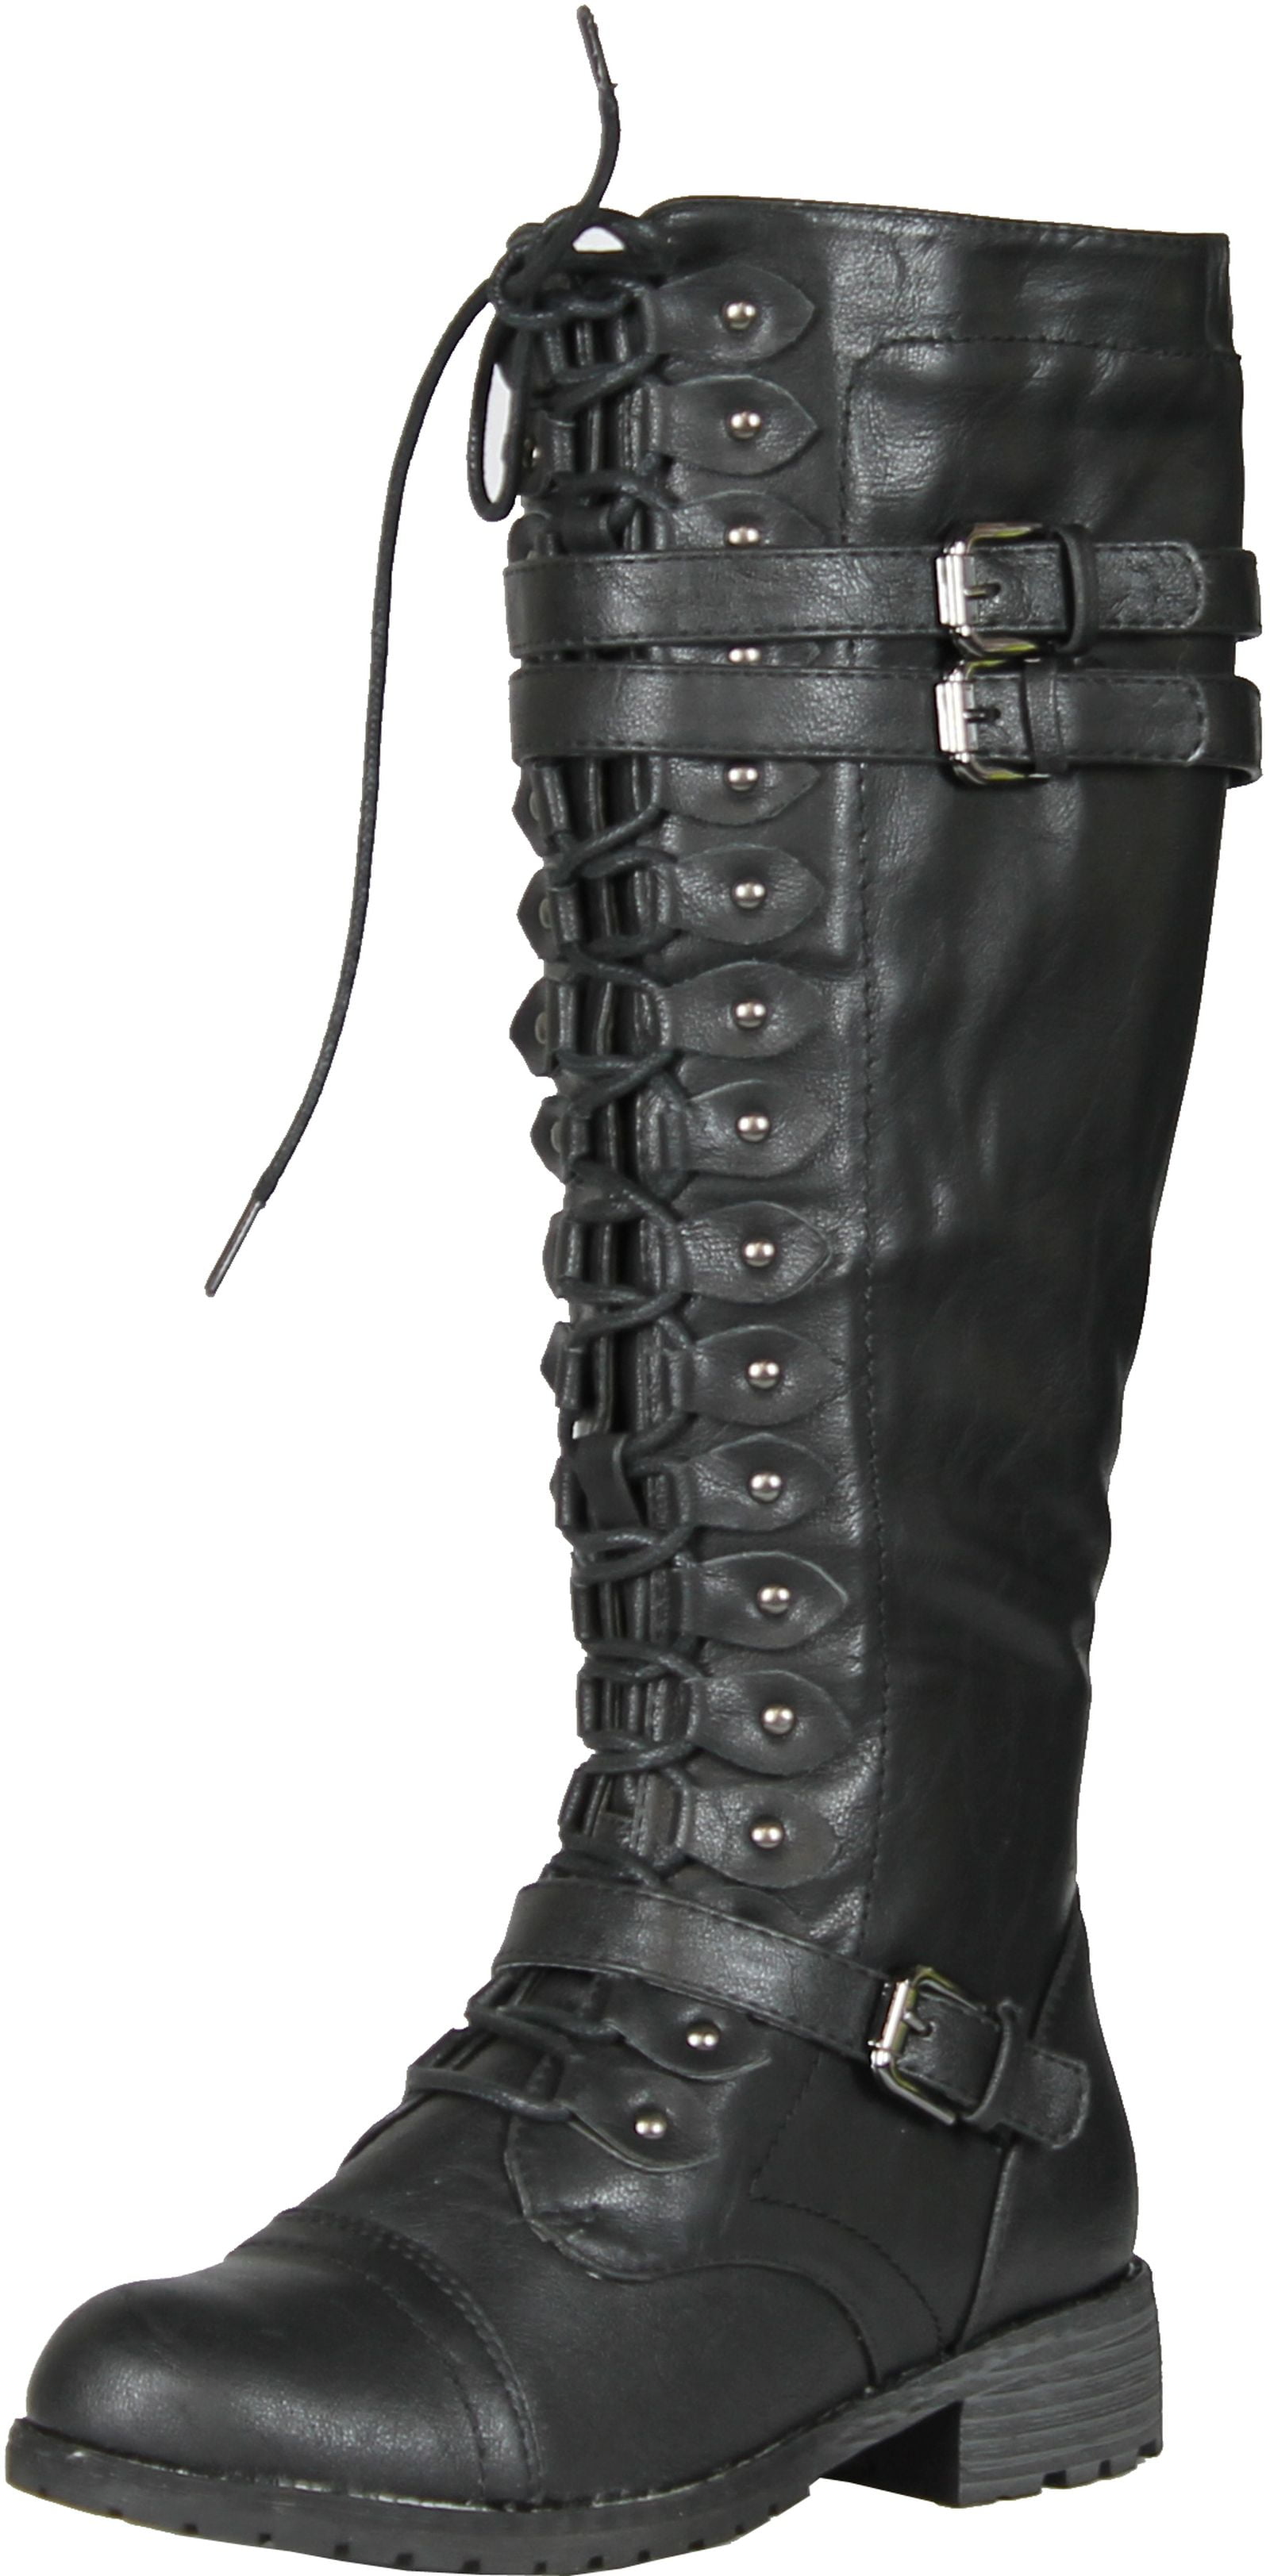 wild diva lace up boots